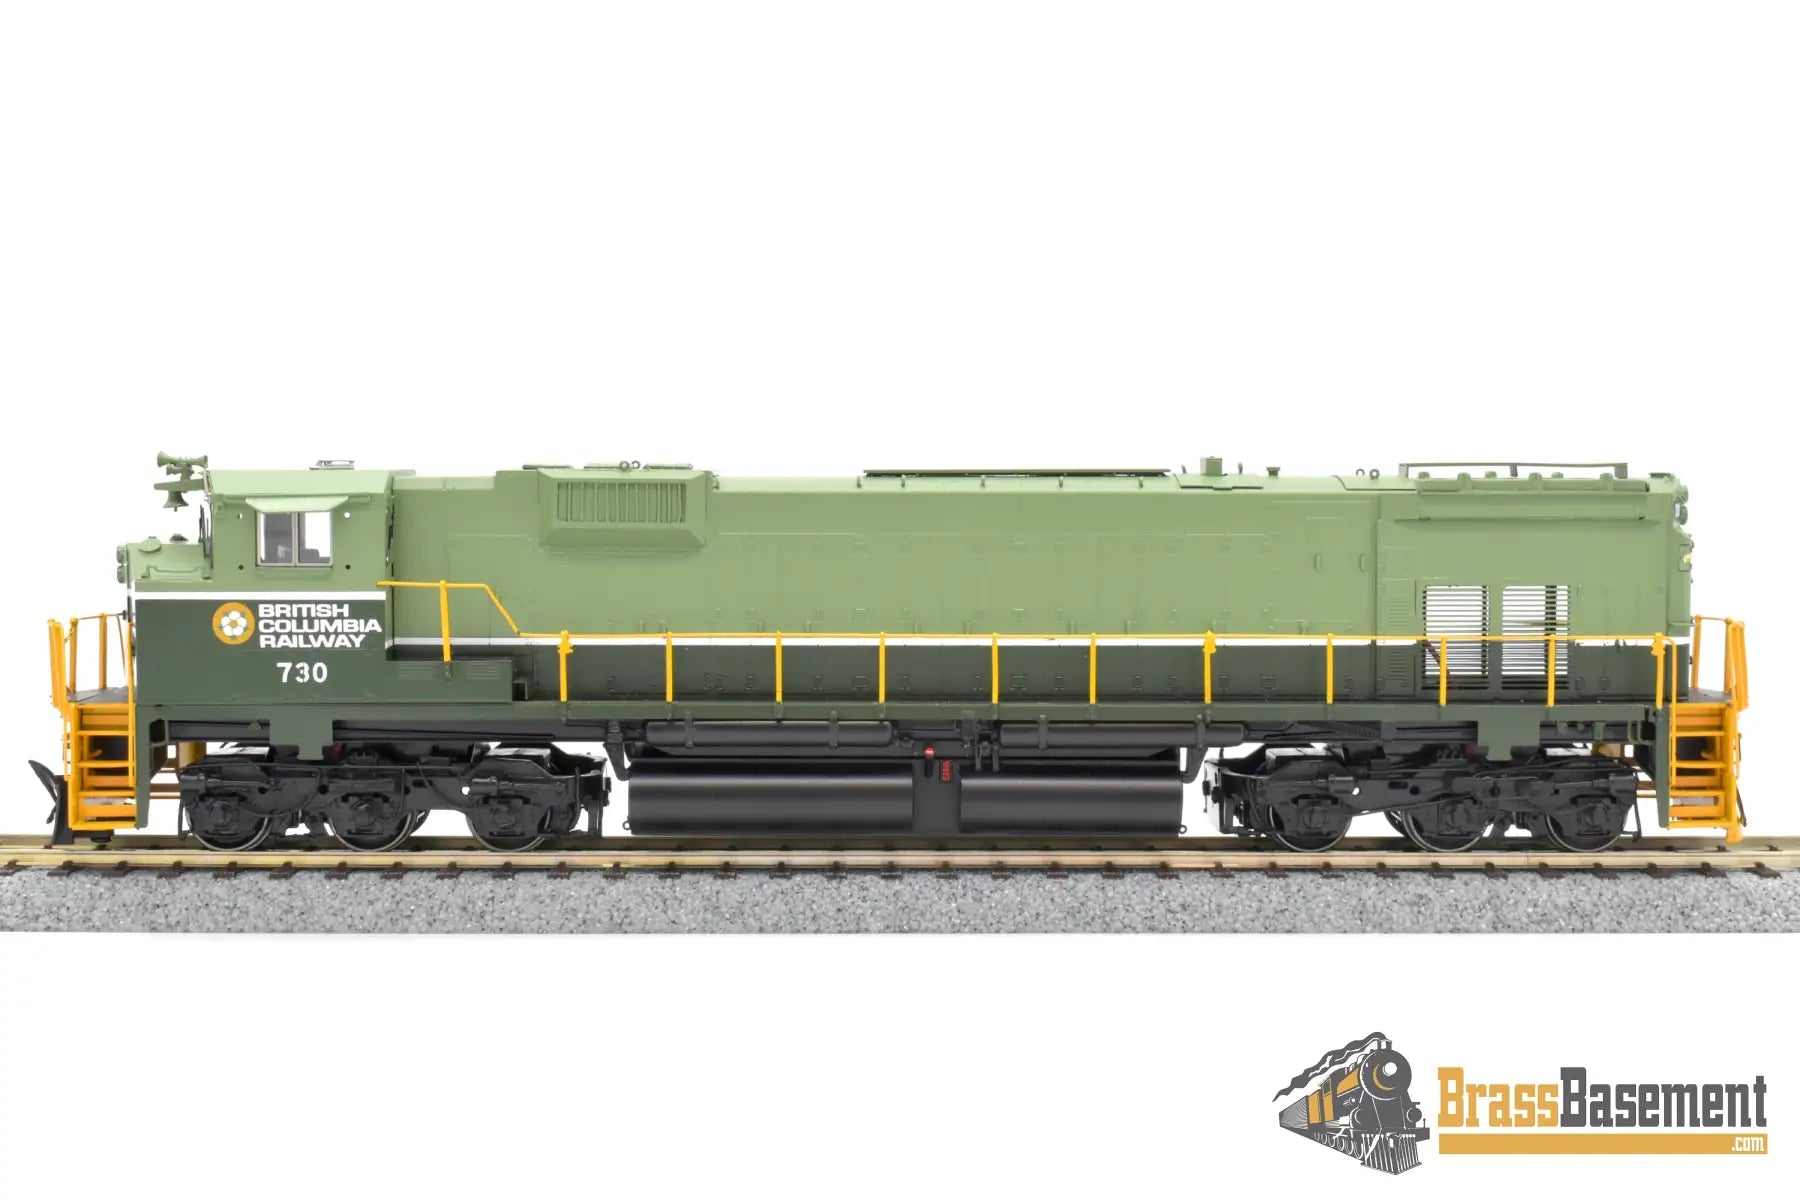 Ho Brass - Omi 6701.1 Bcr British Columbia Railway C630 Wide Nose #730 F/P Two - Tone Green Diesel